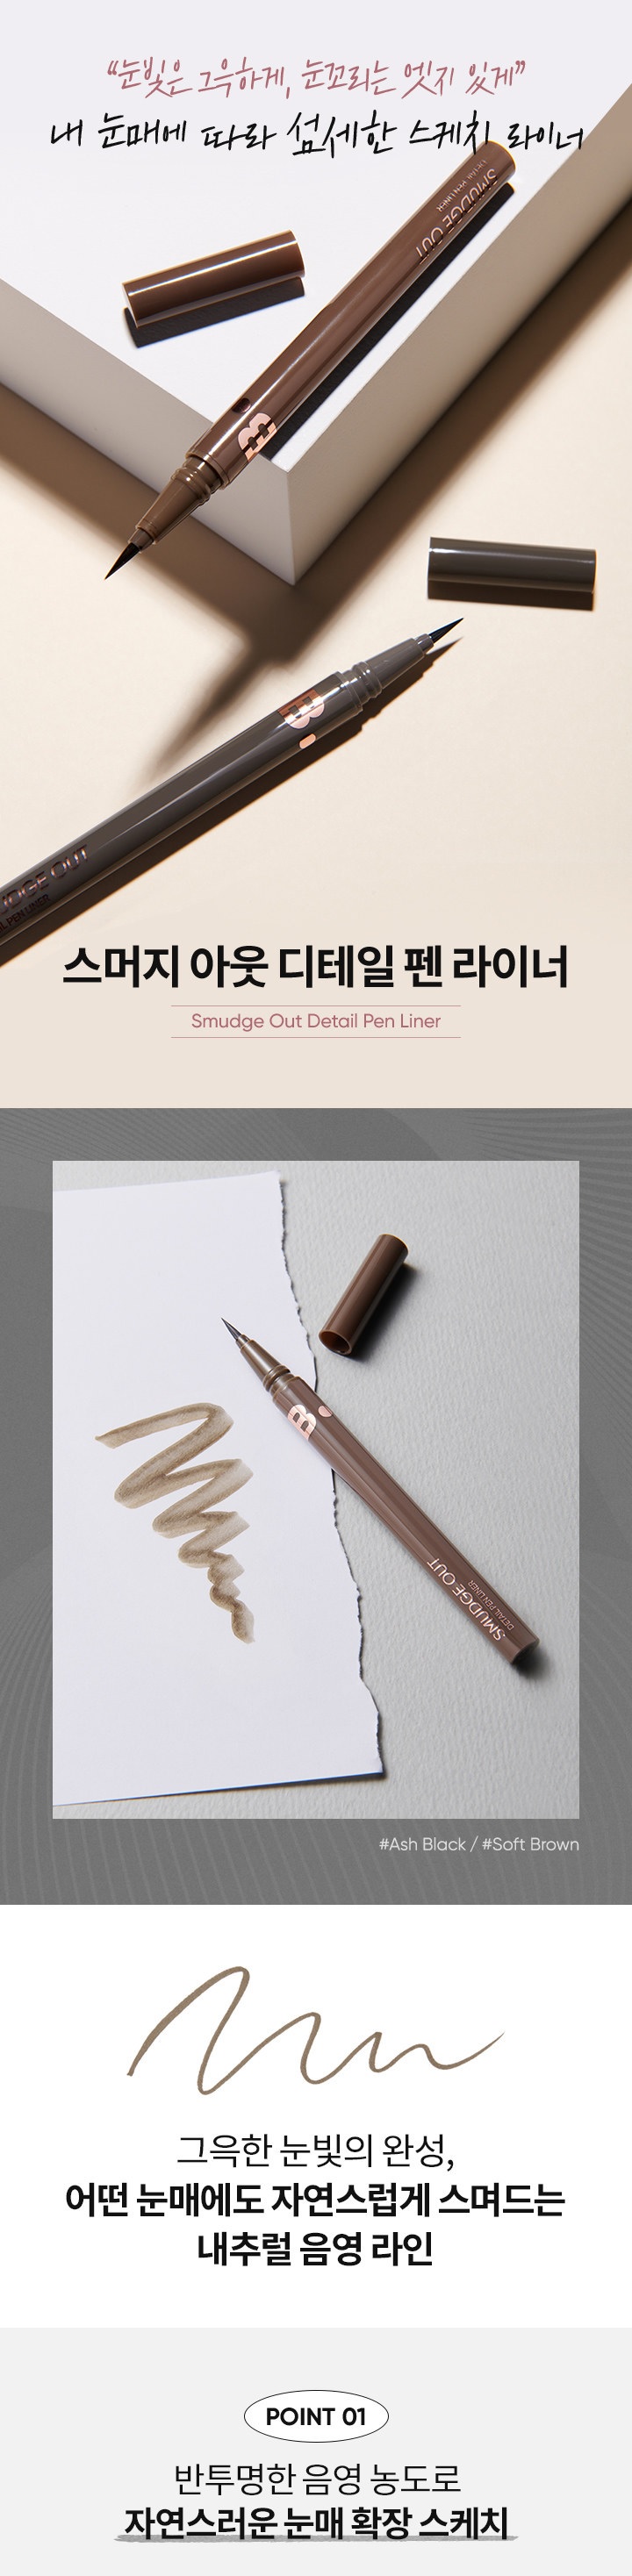 Banila Co Smudge Out Detail Pen Liner korean skincare product online shop malaysia china usa1